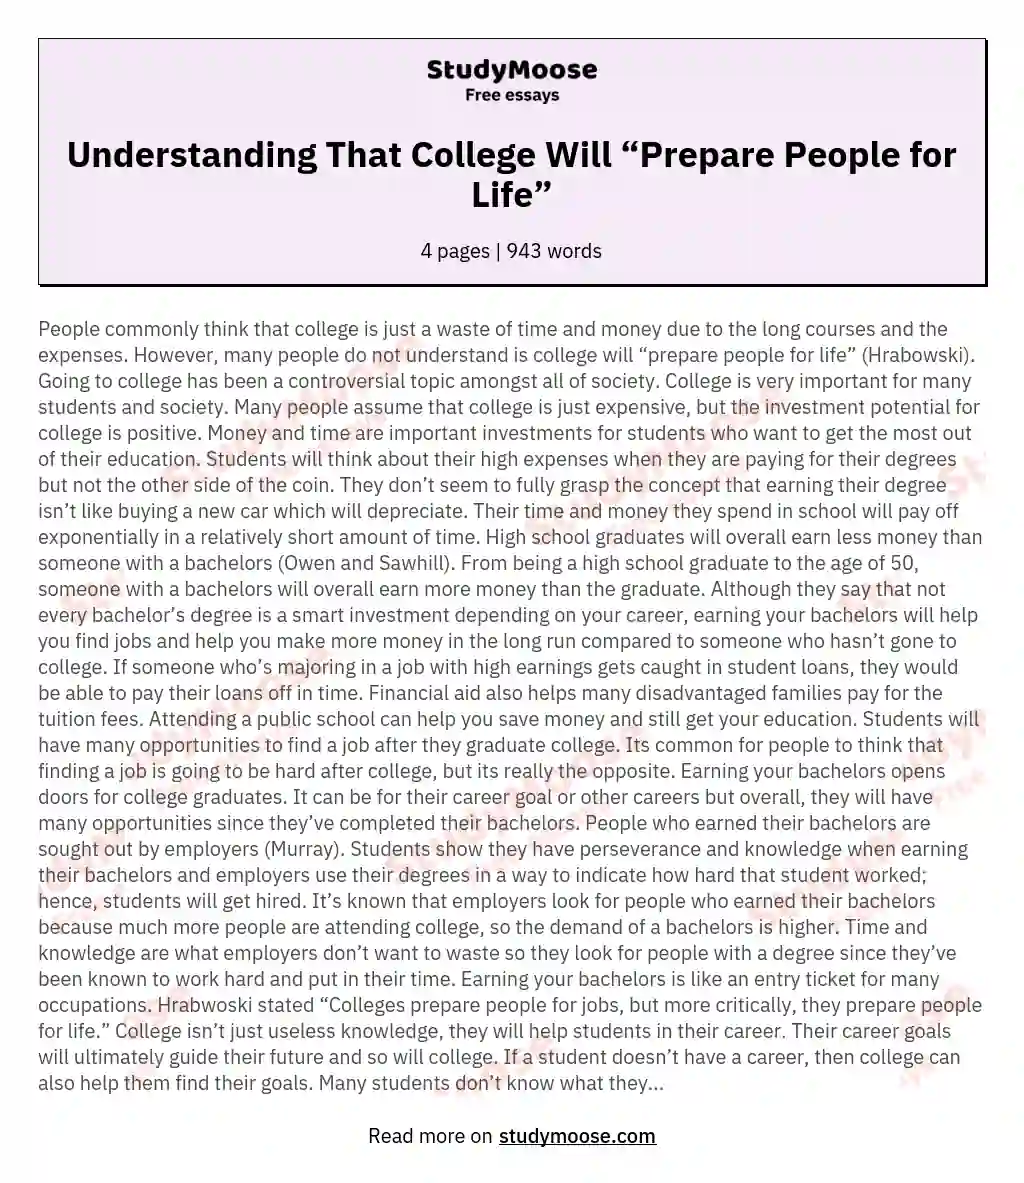 Understanding That College Will “Prepare People for Life” essay